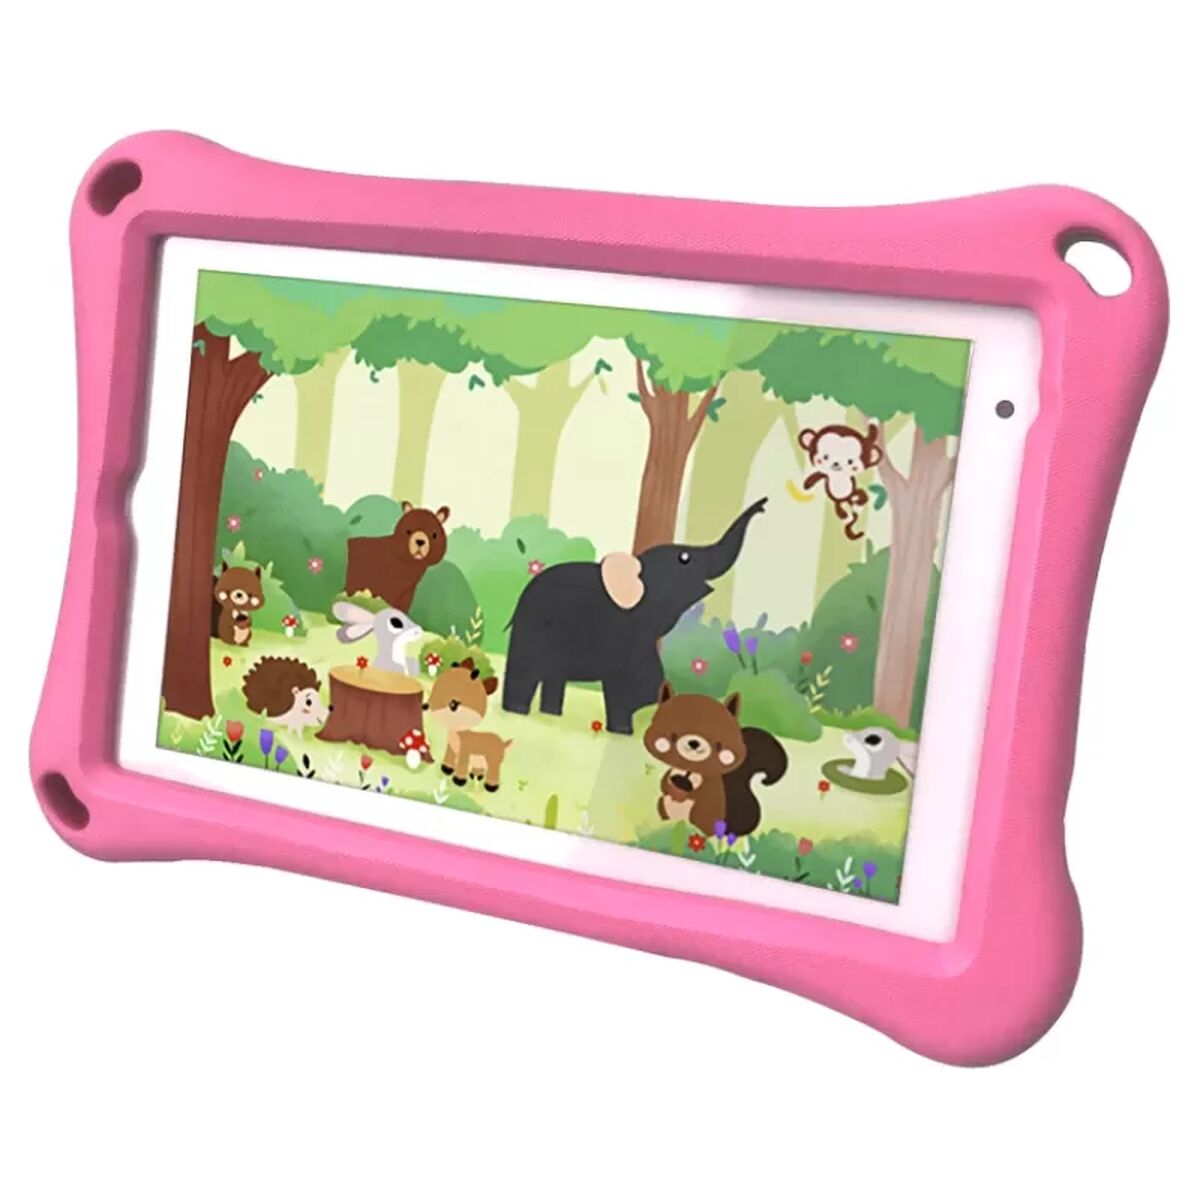 Interactive Tablet for Children K81 Pro Pink, BigBuy Tech, Toys and games, Electronic toys, interactive-tablet-for-children-k81-pro-pink, Brand_BigBuy Tech, category-reference-2609, category-reference-2617, category-reference-2626, category-reference-t-11190, category-reference-t-11203, category-reference-t-11206, category-reference-t-19663, Condition_NEW, entertainment, para los más peques, Price_100 - 200, telephones & tablets, vuelta al cole, RiotNook